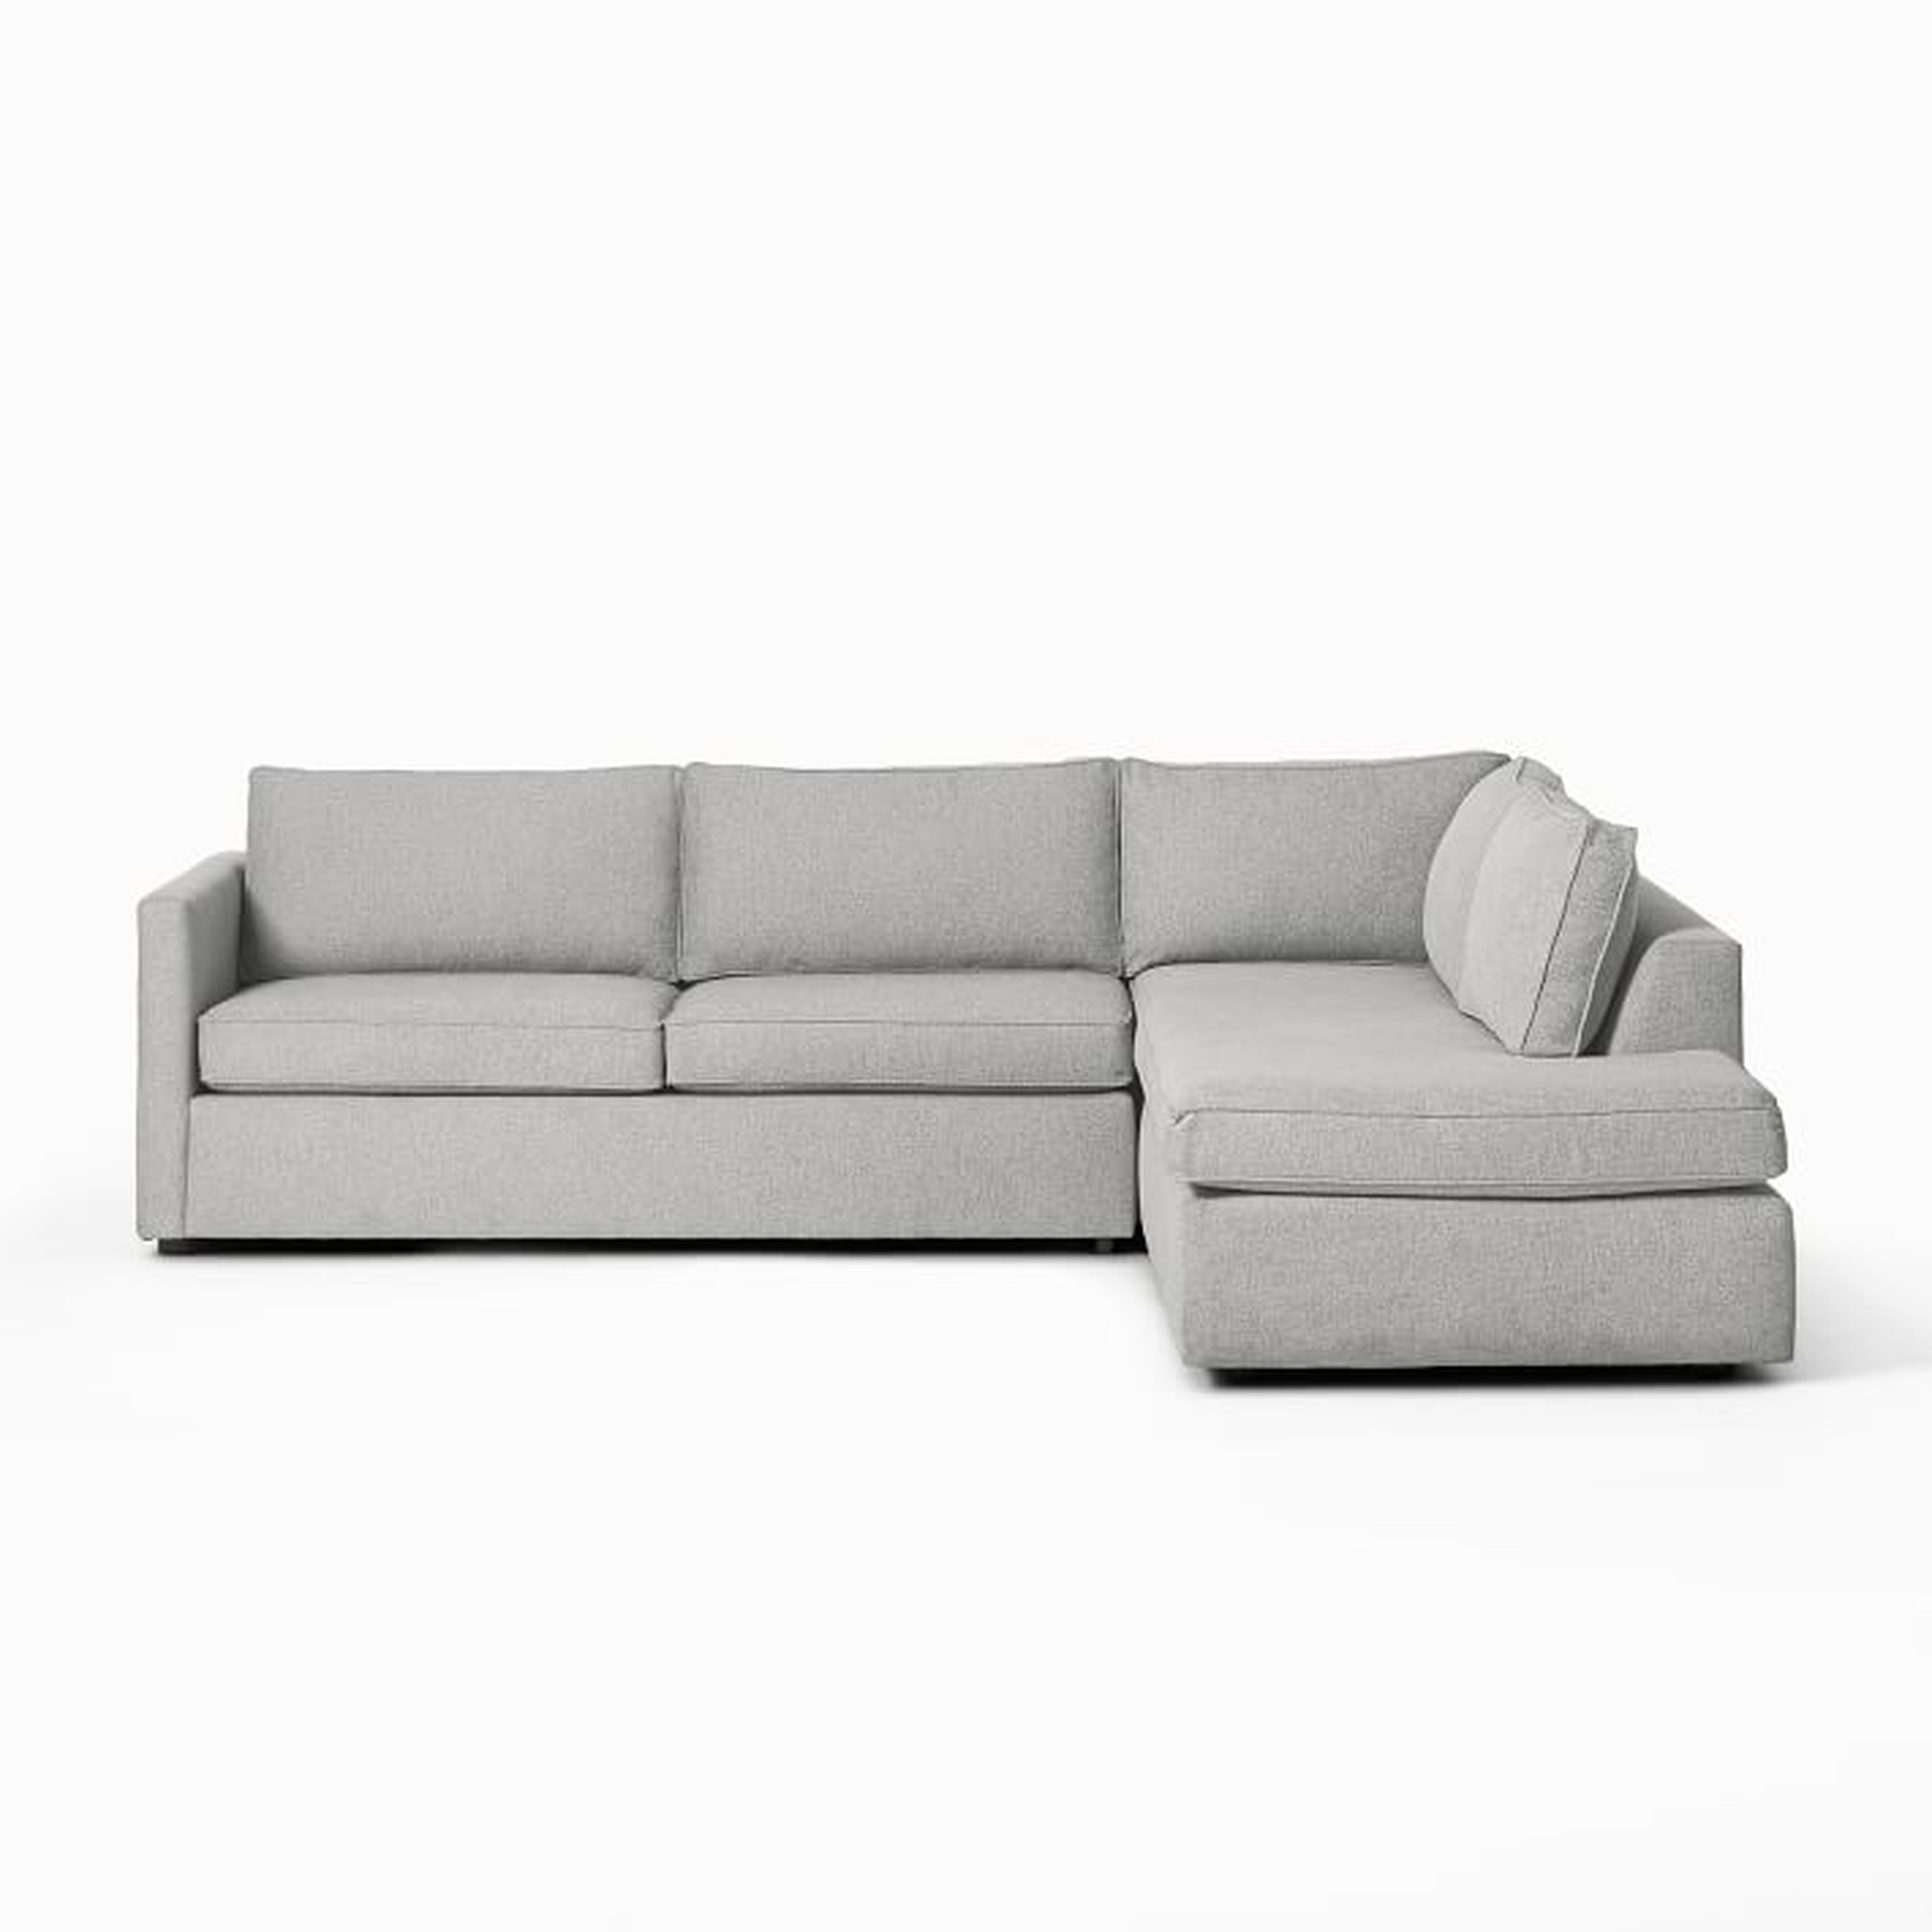 Harris Sectional Set 10: Right Arm 65" Sofa, Left Arm Terminal Chaise, Poly, Heathered Crosshatch, Feather Gray, - West Elm